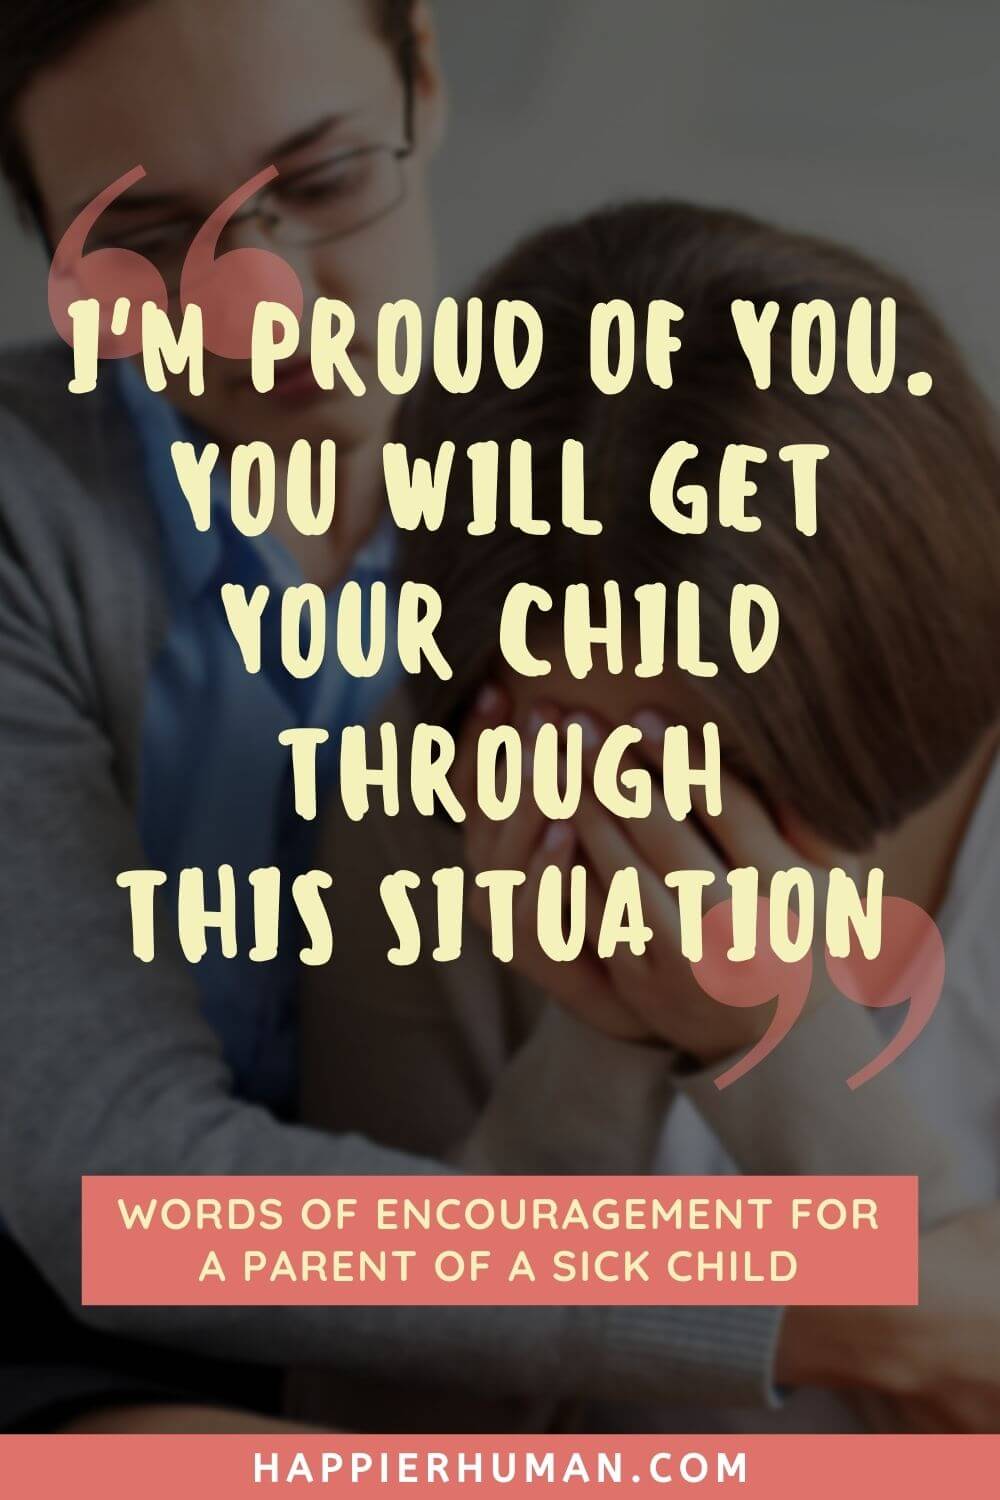 Words of Encouragement for Sick Child - "I'm proud of you. You will get your child through this situation" | what not to say to parents of sick child | words of encouragement for the sick from the bible | biblical words of encouragement for a son